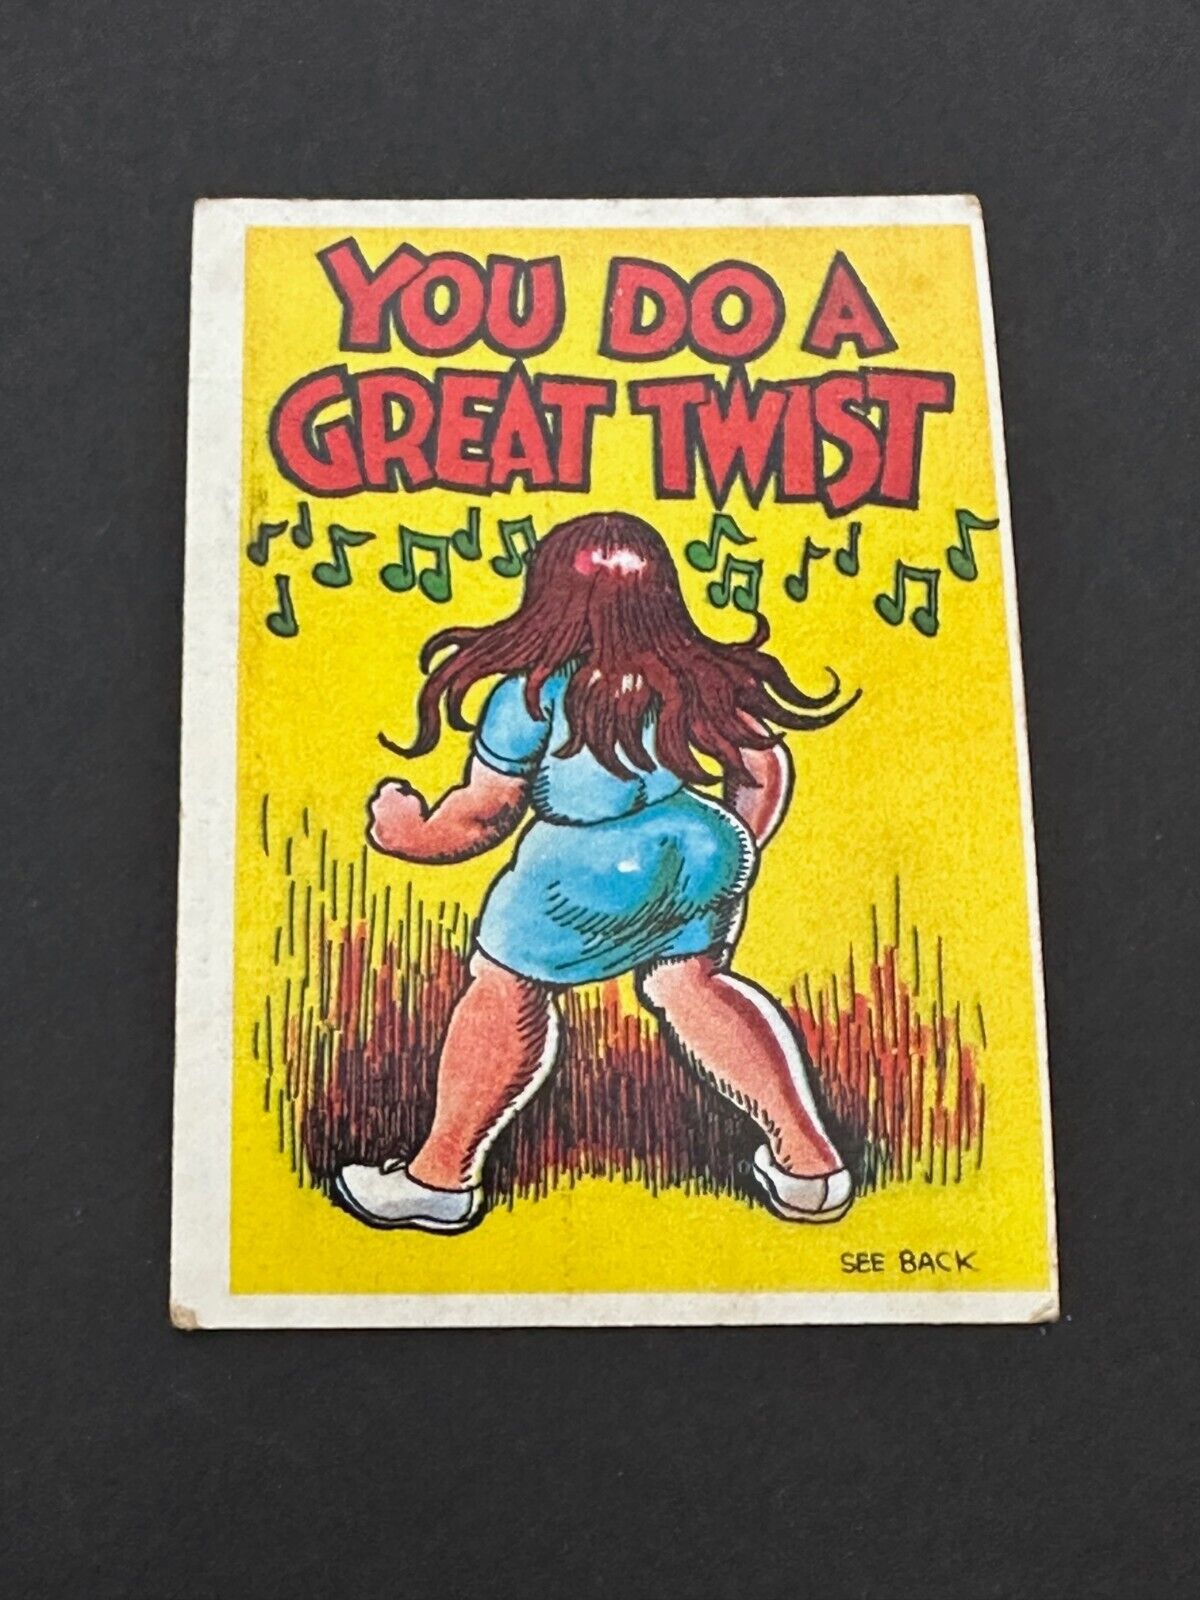 Topps 1965 Monster Greeting Trading Card #31 Robert Crumb At Least Your Nose